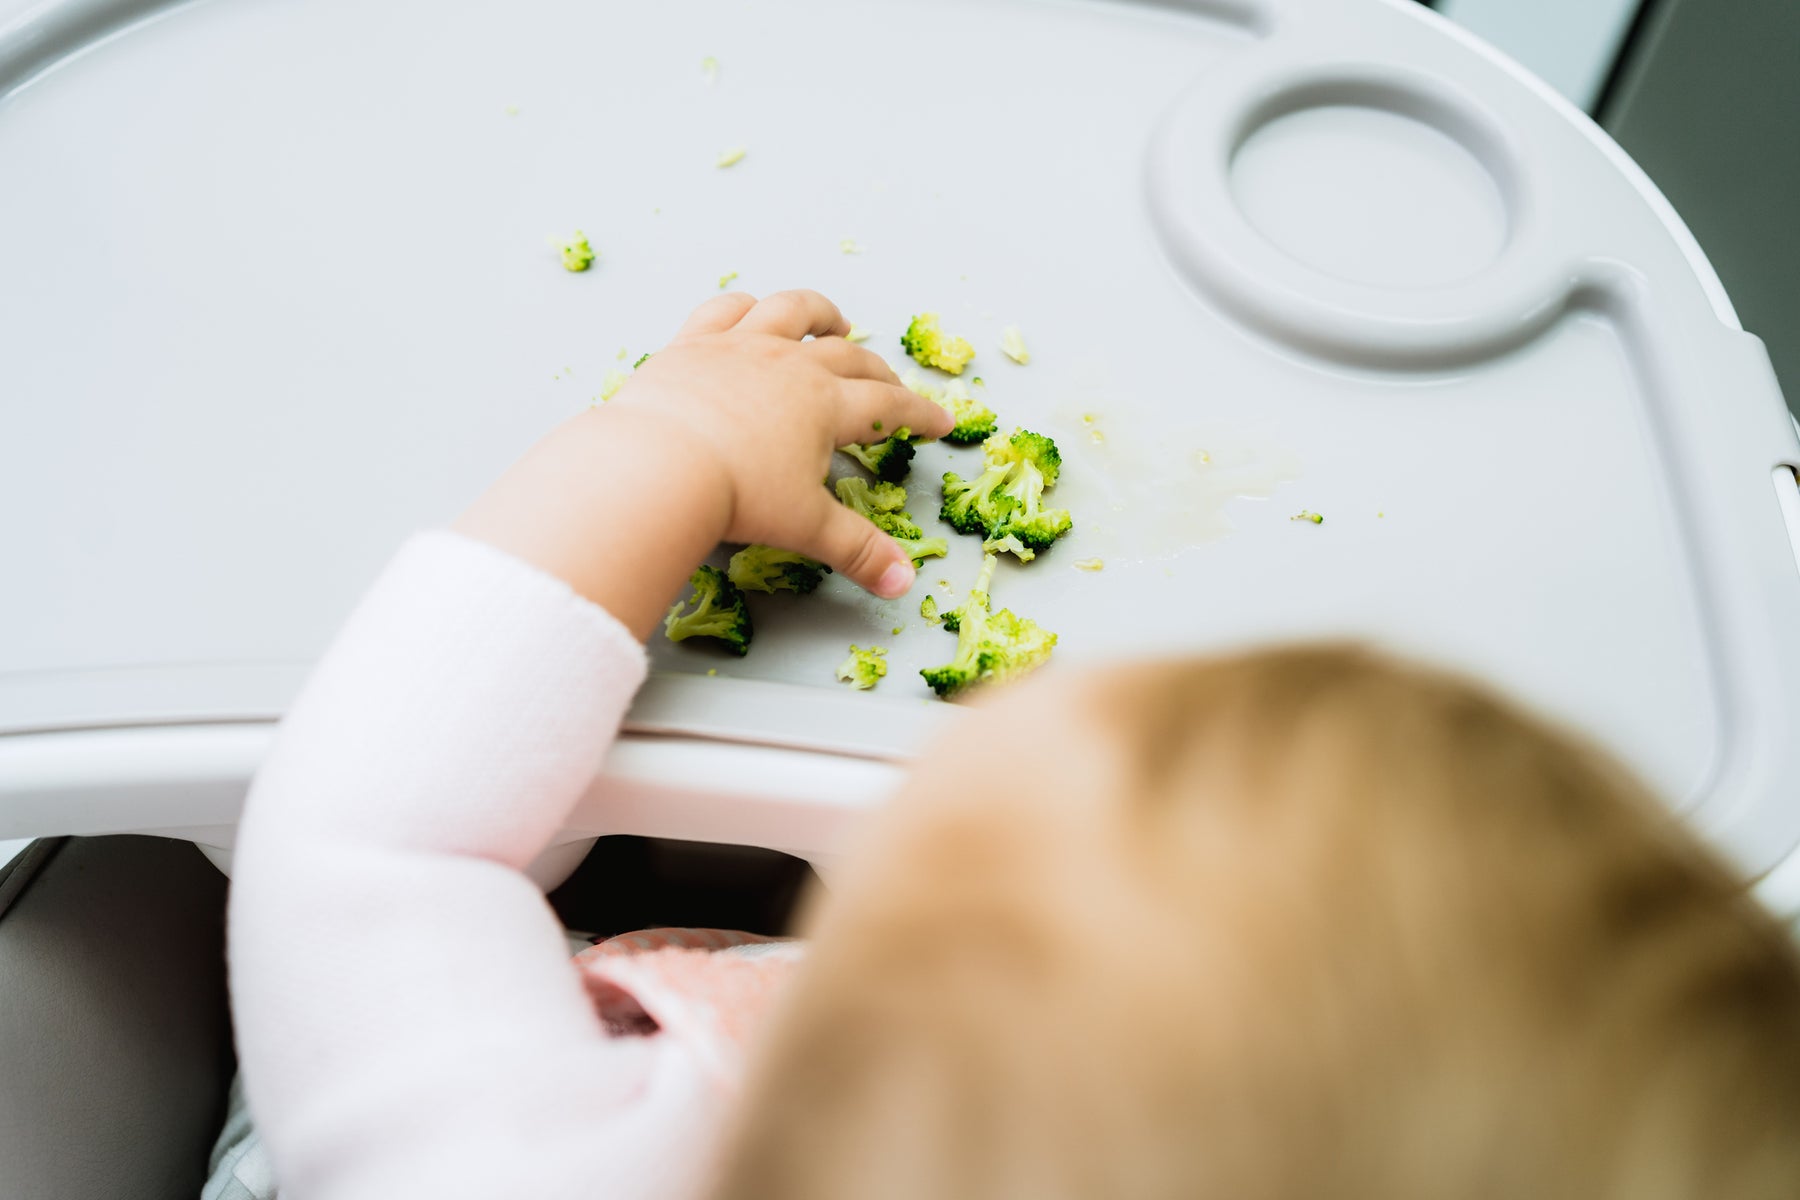 Baby-Led Weaning…Is It For Me?